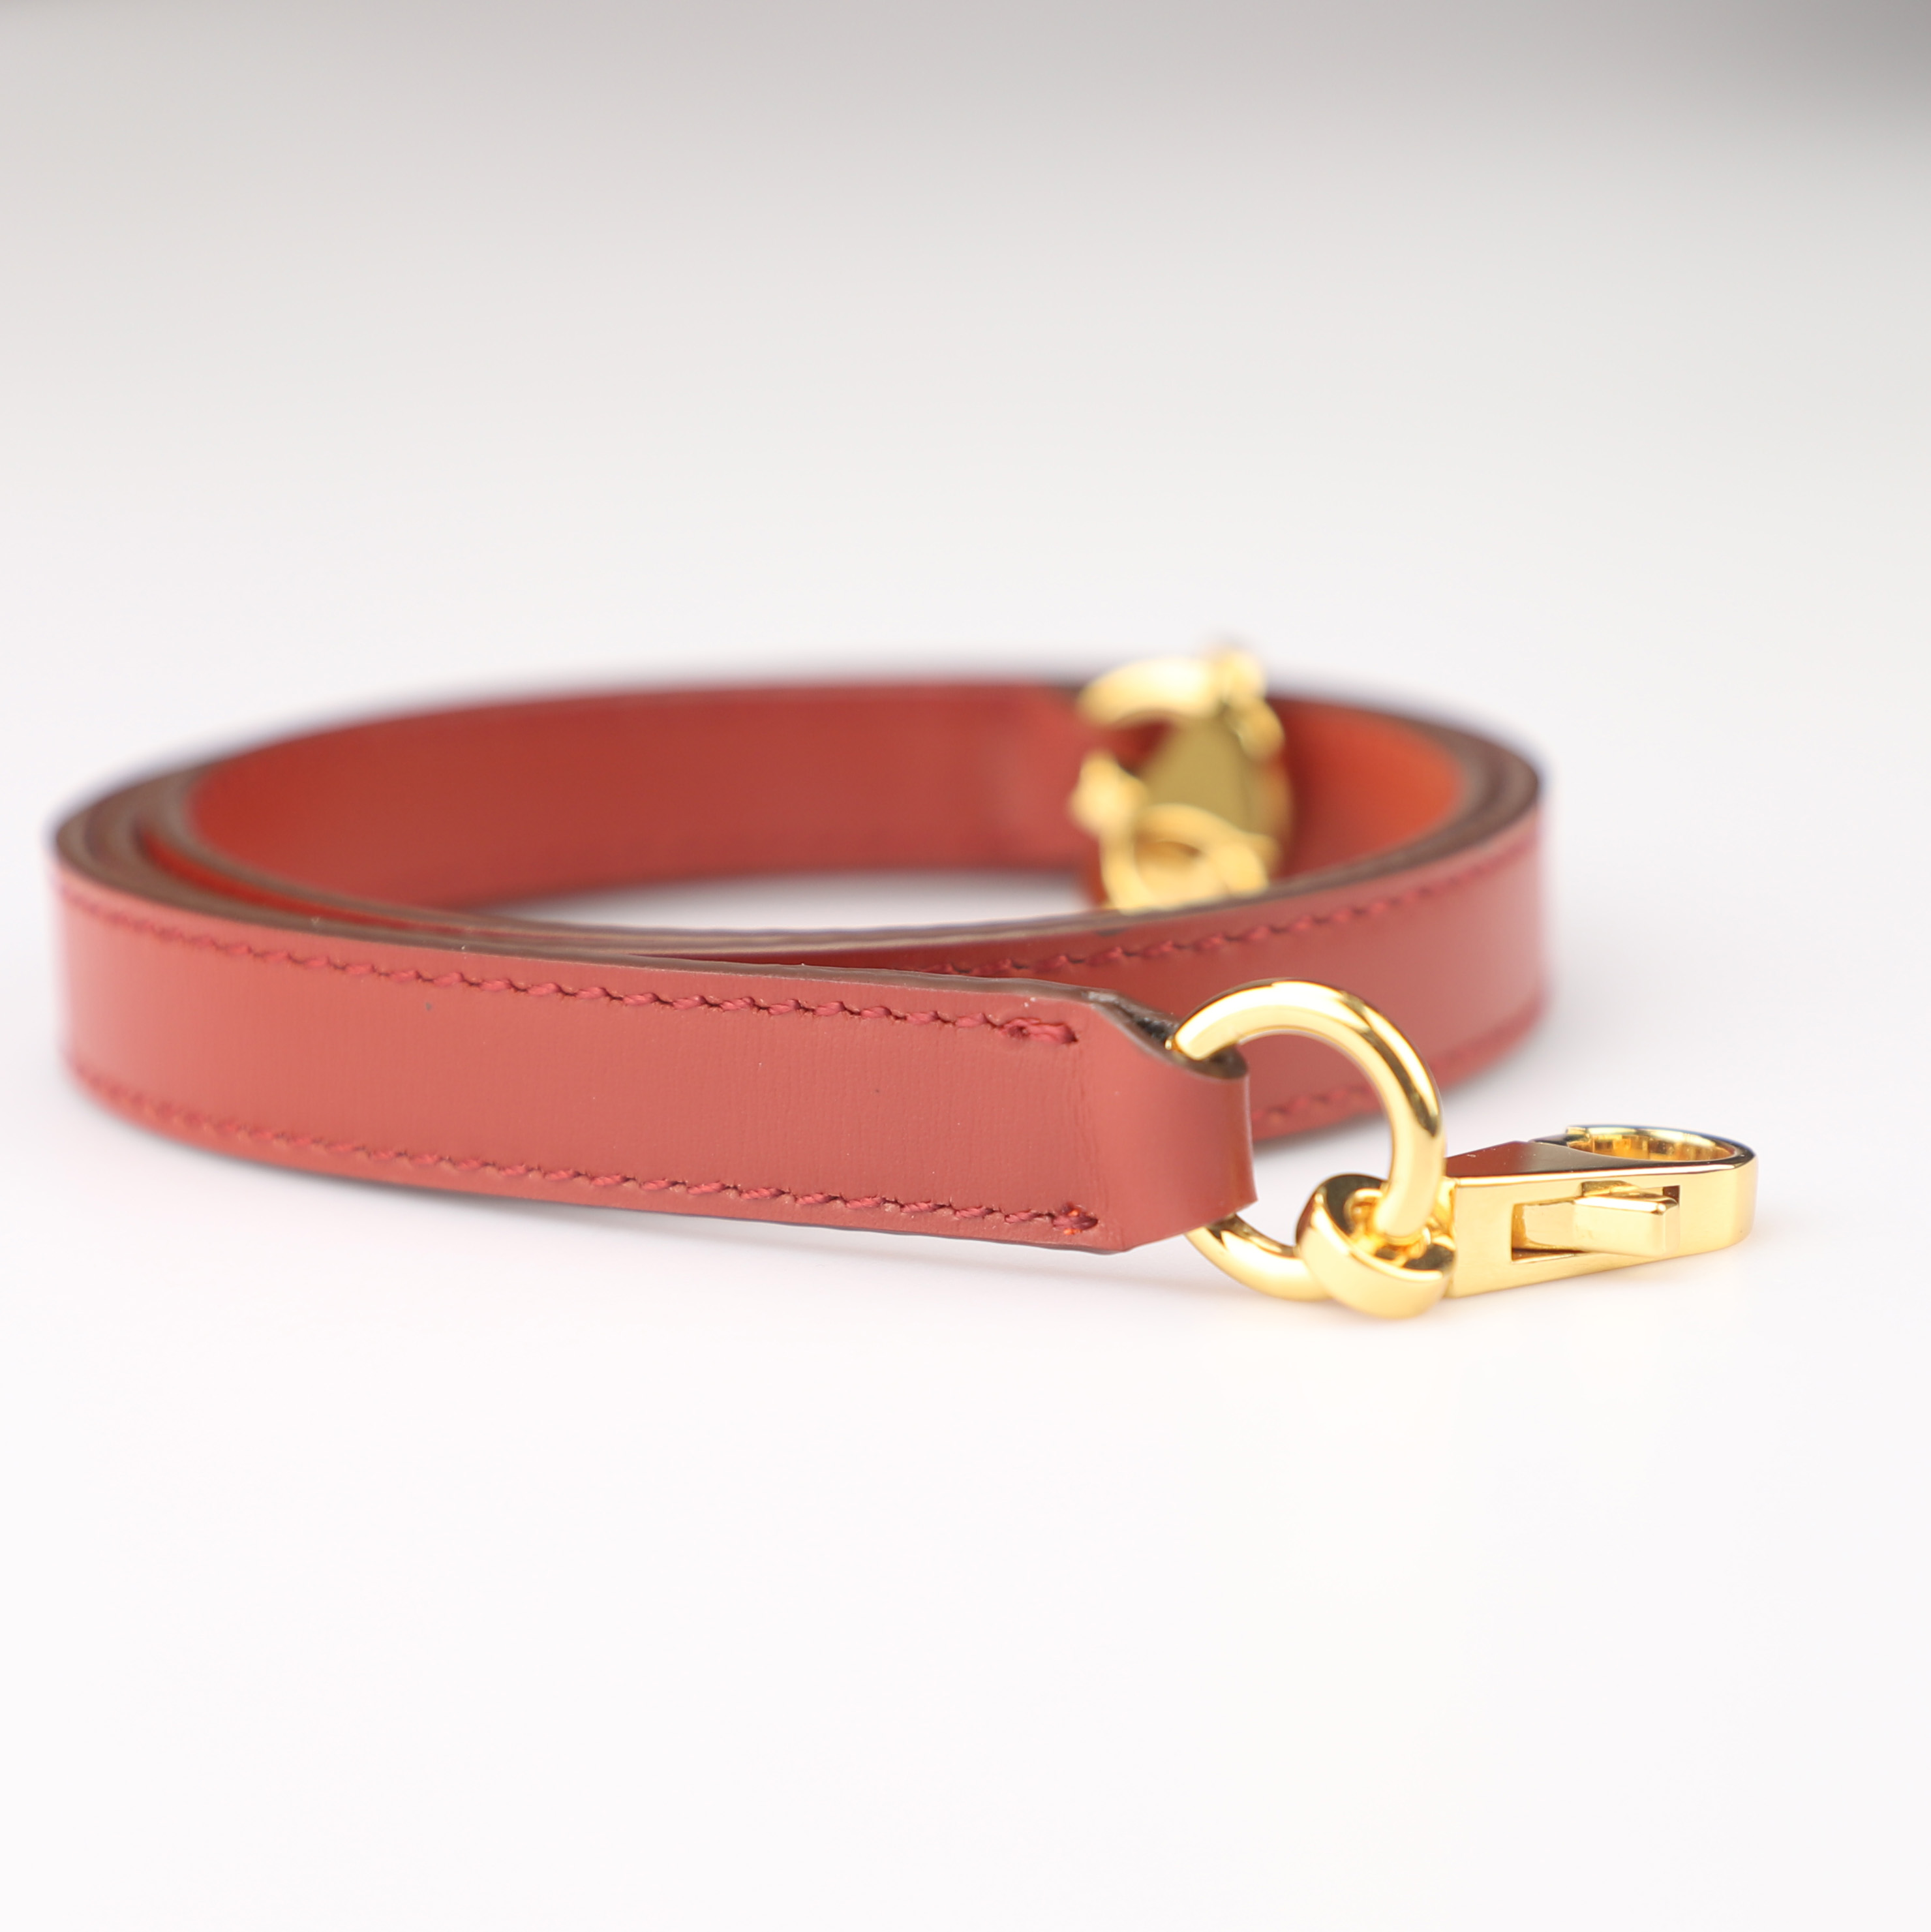 Handmade leather bag strap,Leather bag charm and Leather